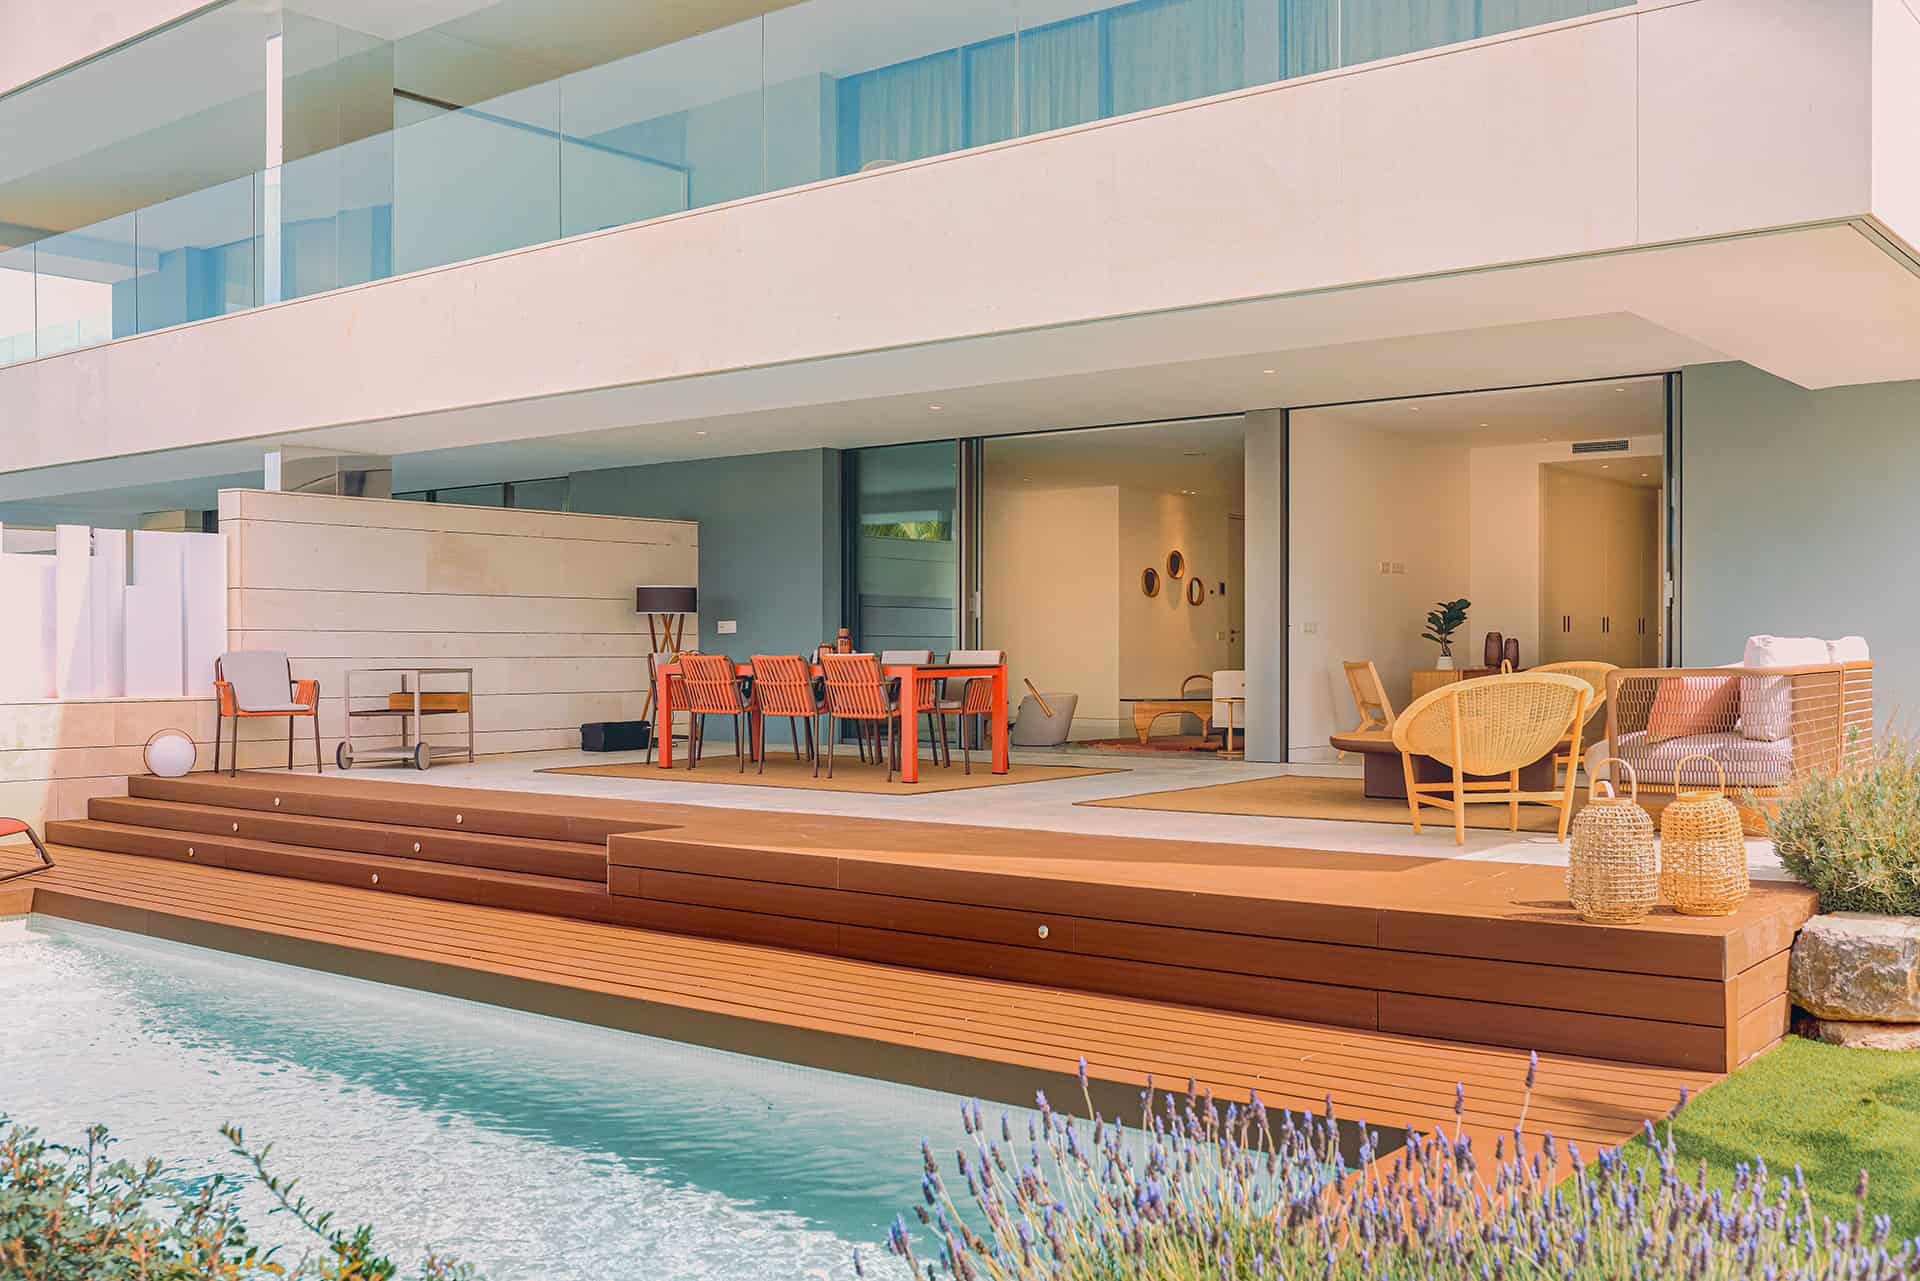 An exit to the outside with infinite uses The spacious pool area combines the best of the interior and exterior without abandoning the home’s comfort and privacy. Each residence has wide and open spaces that integrate seamlessly.More